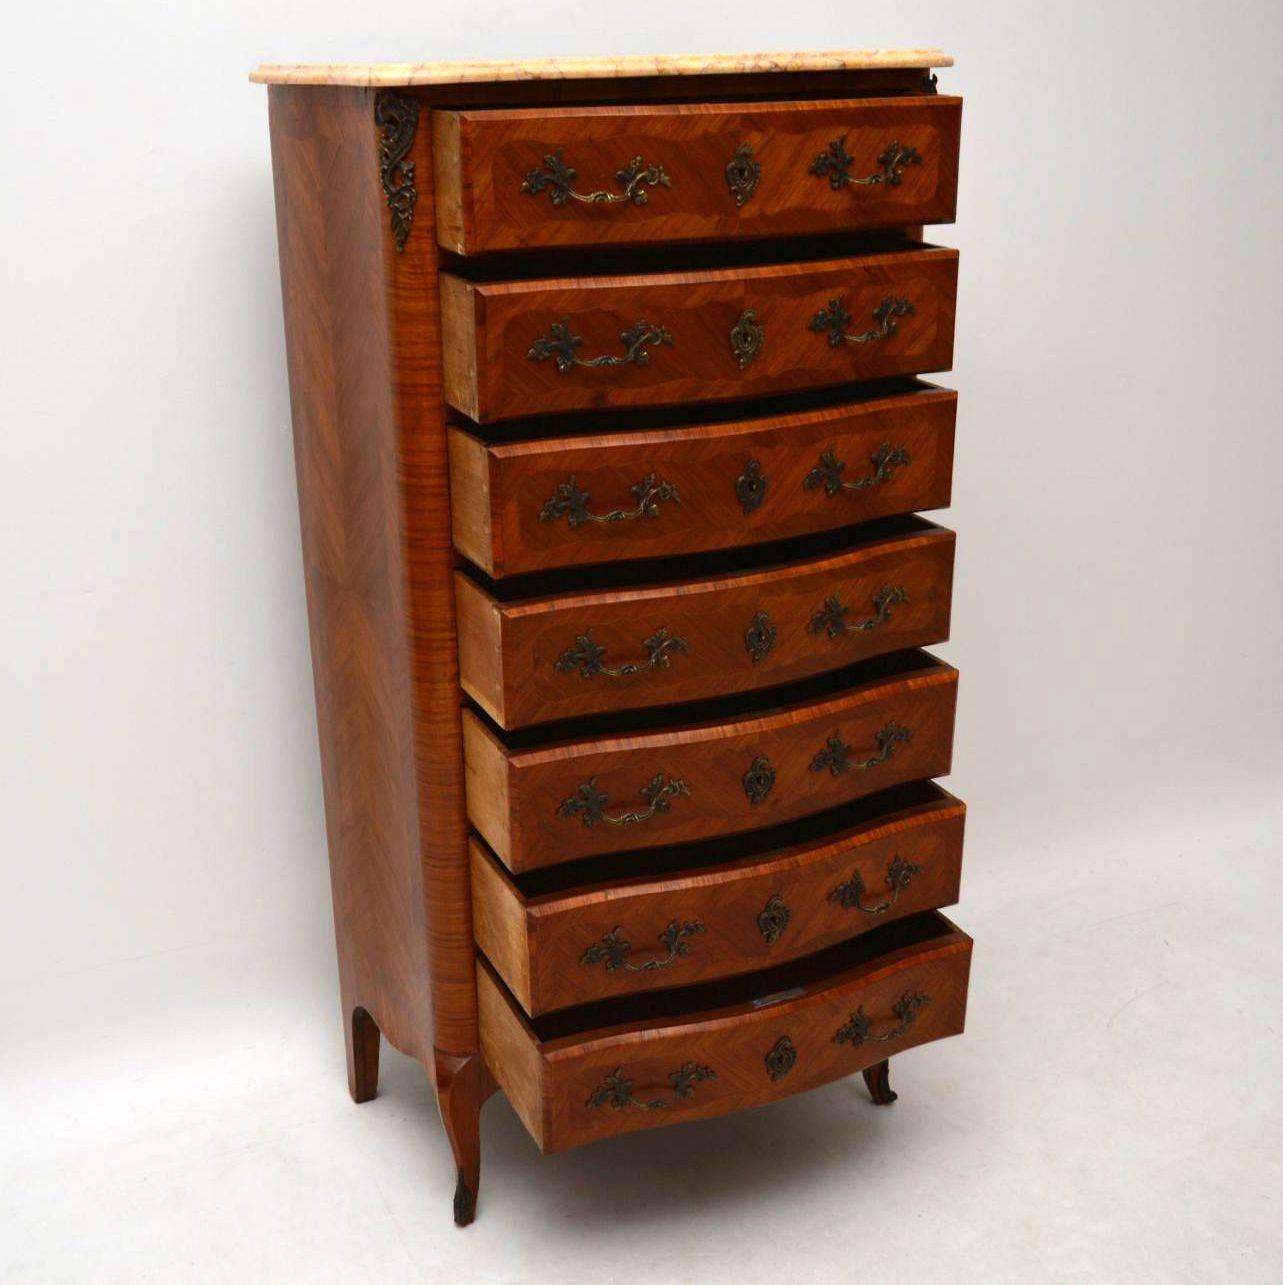 Tall antique French marble-top chest of drawers in kingwood with cross banded sides and drawers. The chest is in very good original condition and dates from circa 1890-1910 period. The sides are curved, the front is serpentine shaped and it sits on